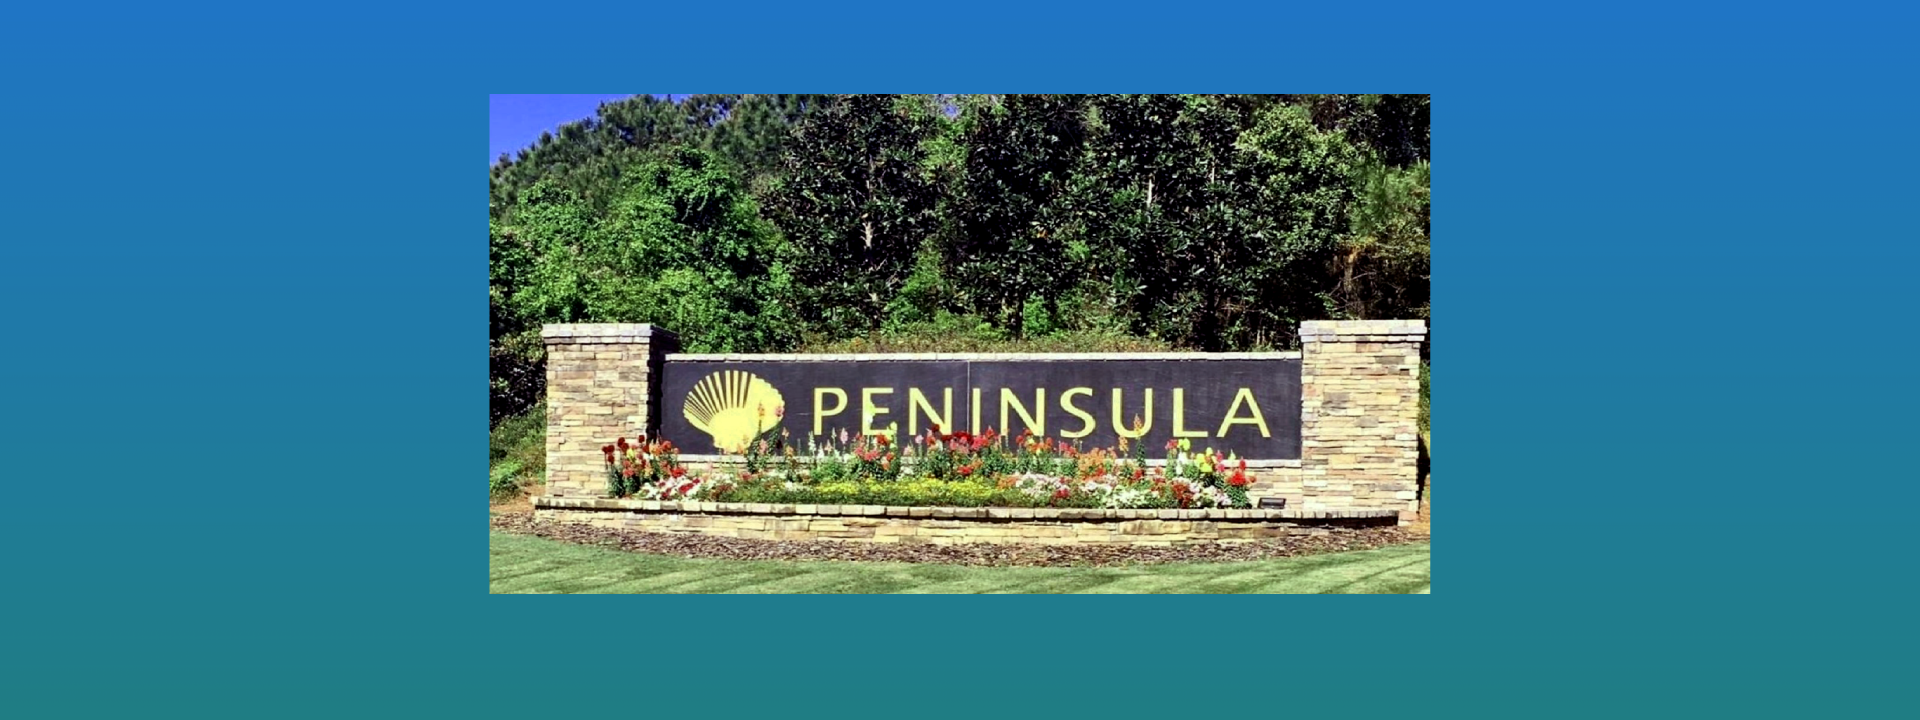 The entrance sign with trees in the background located at The Peninsula, Gulf Shores AL